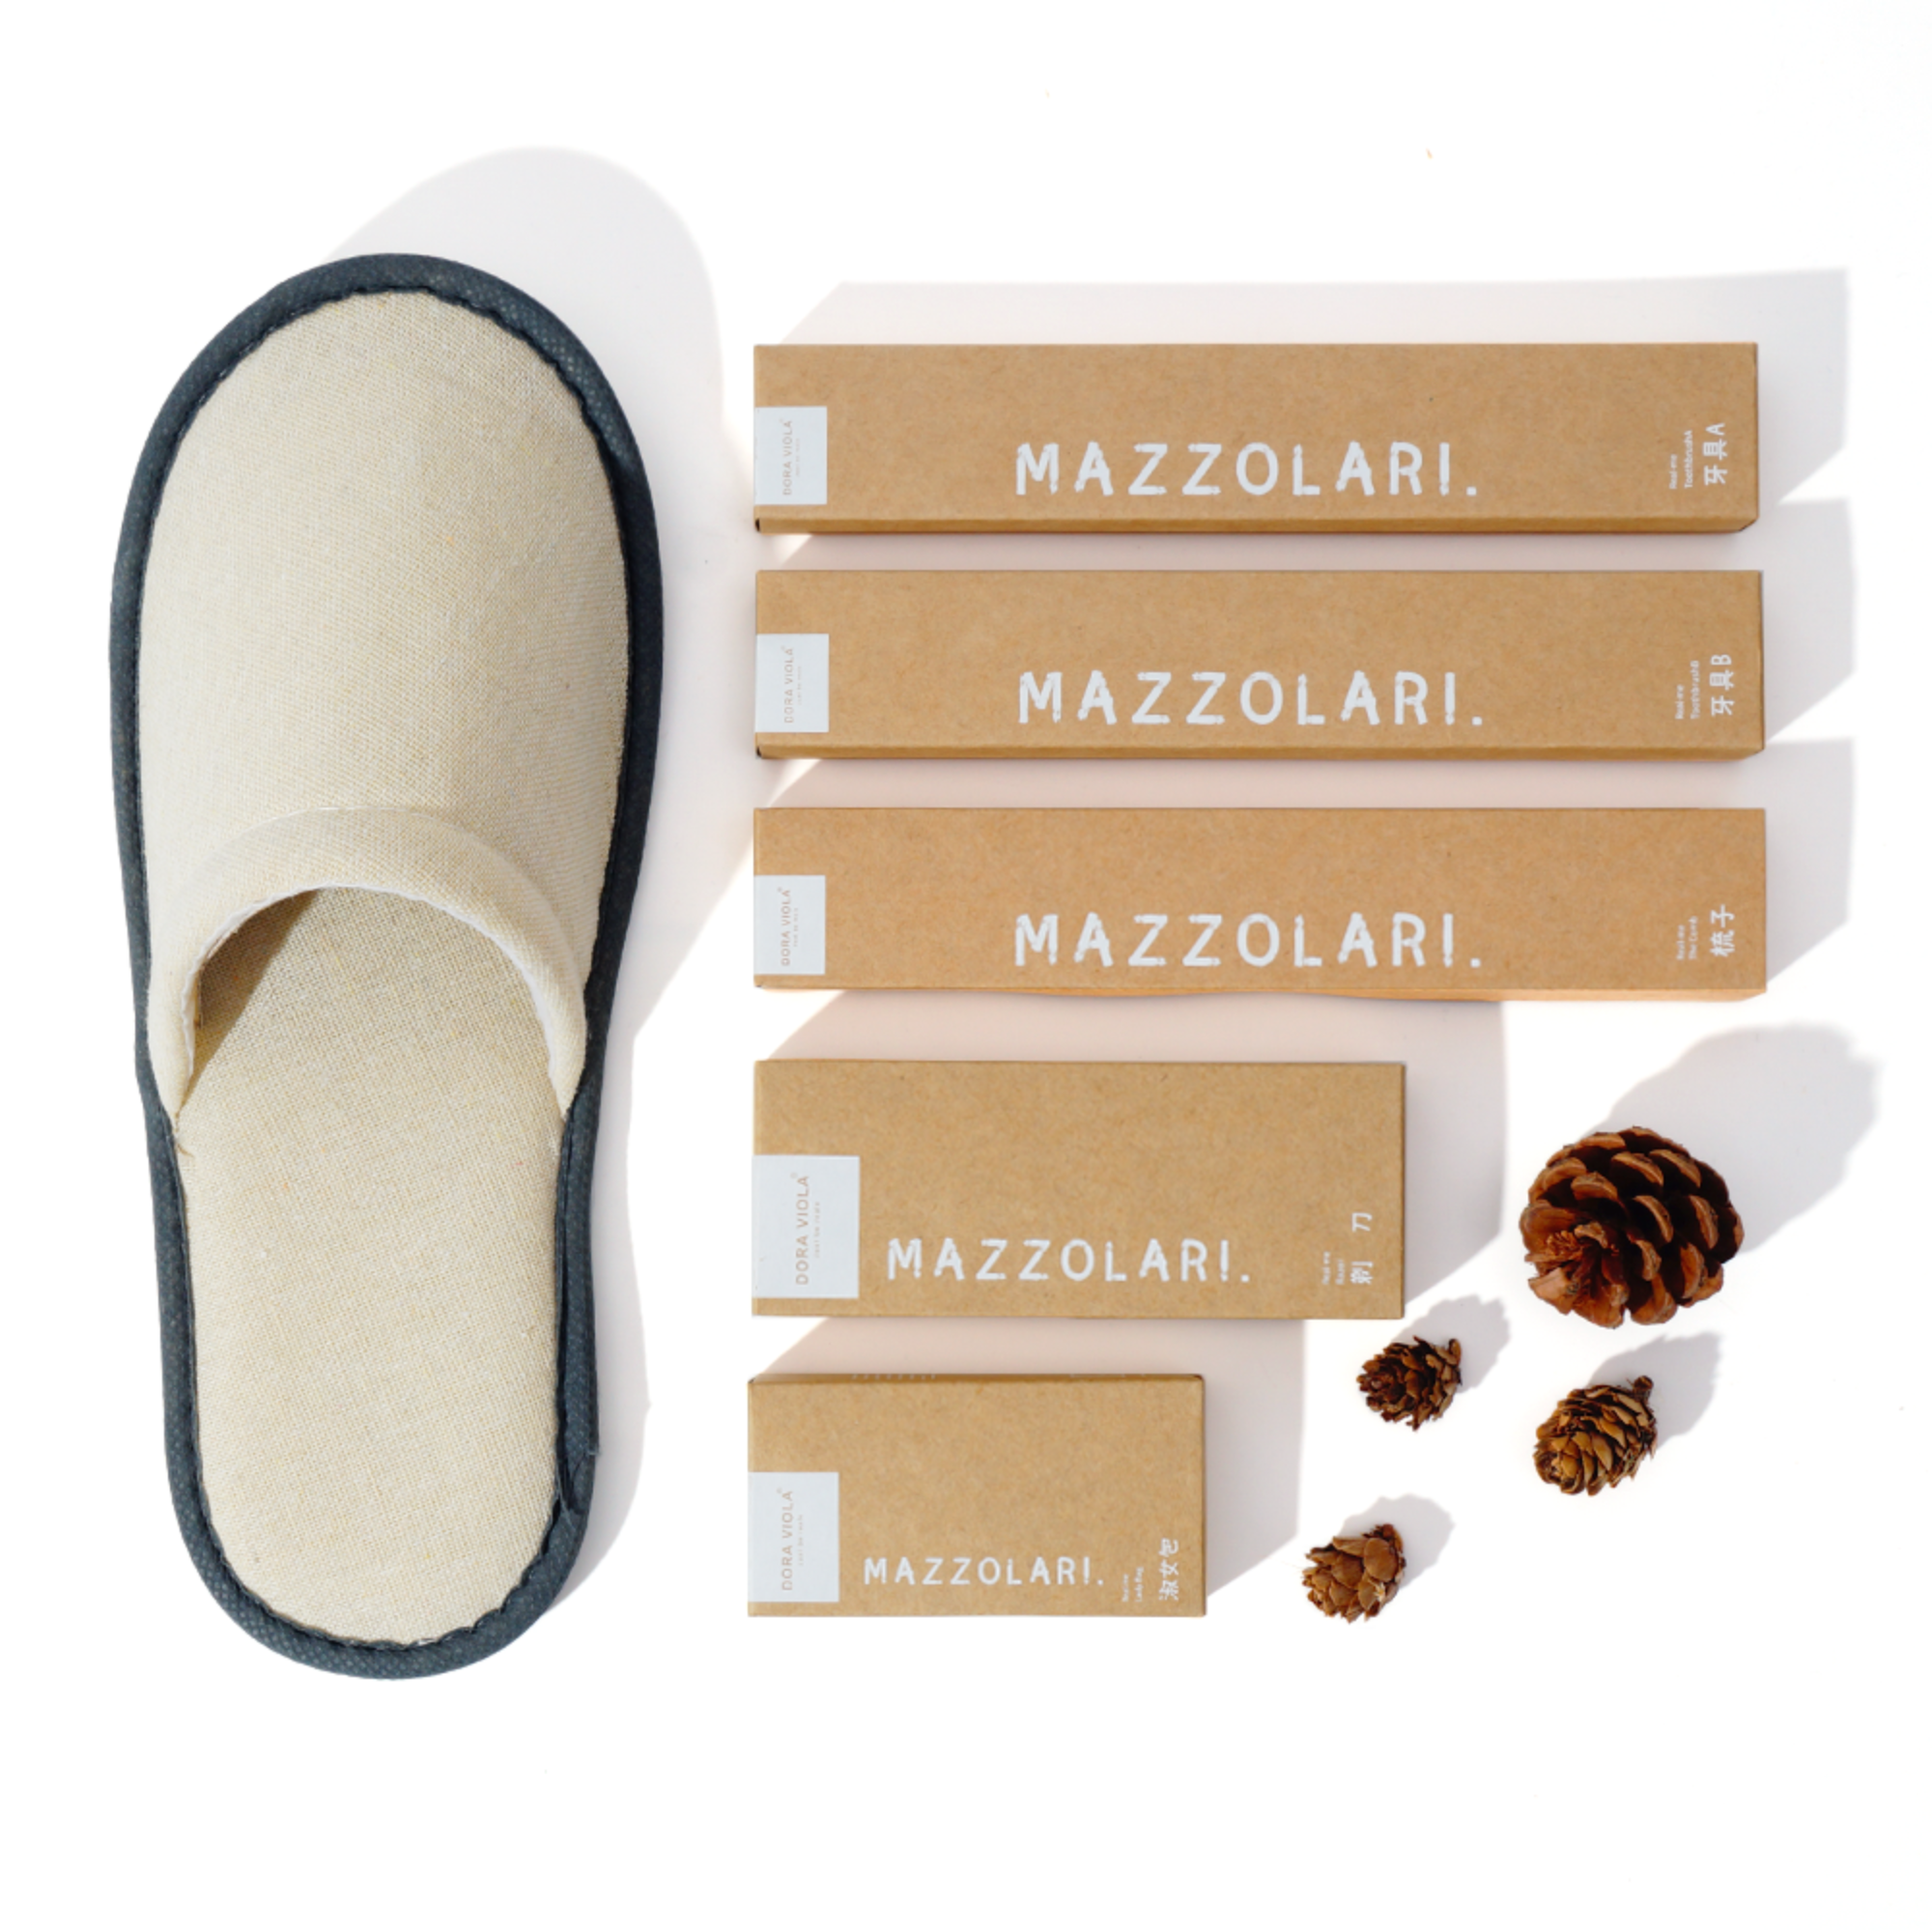 Eco Friendly Hotel Amenities Biodegradable Disposable Slipper And Toothbrush Amenities